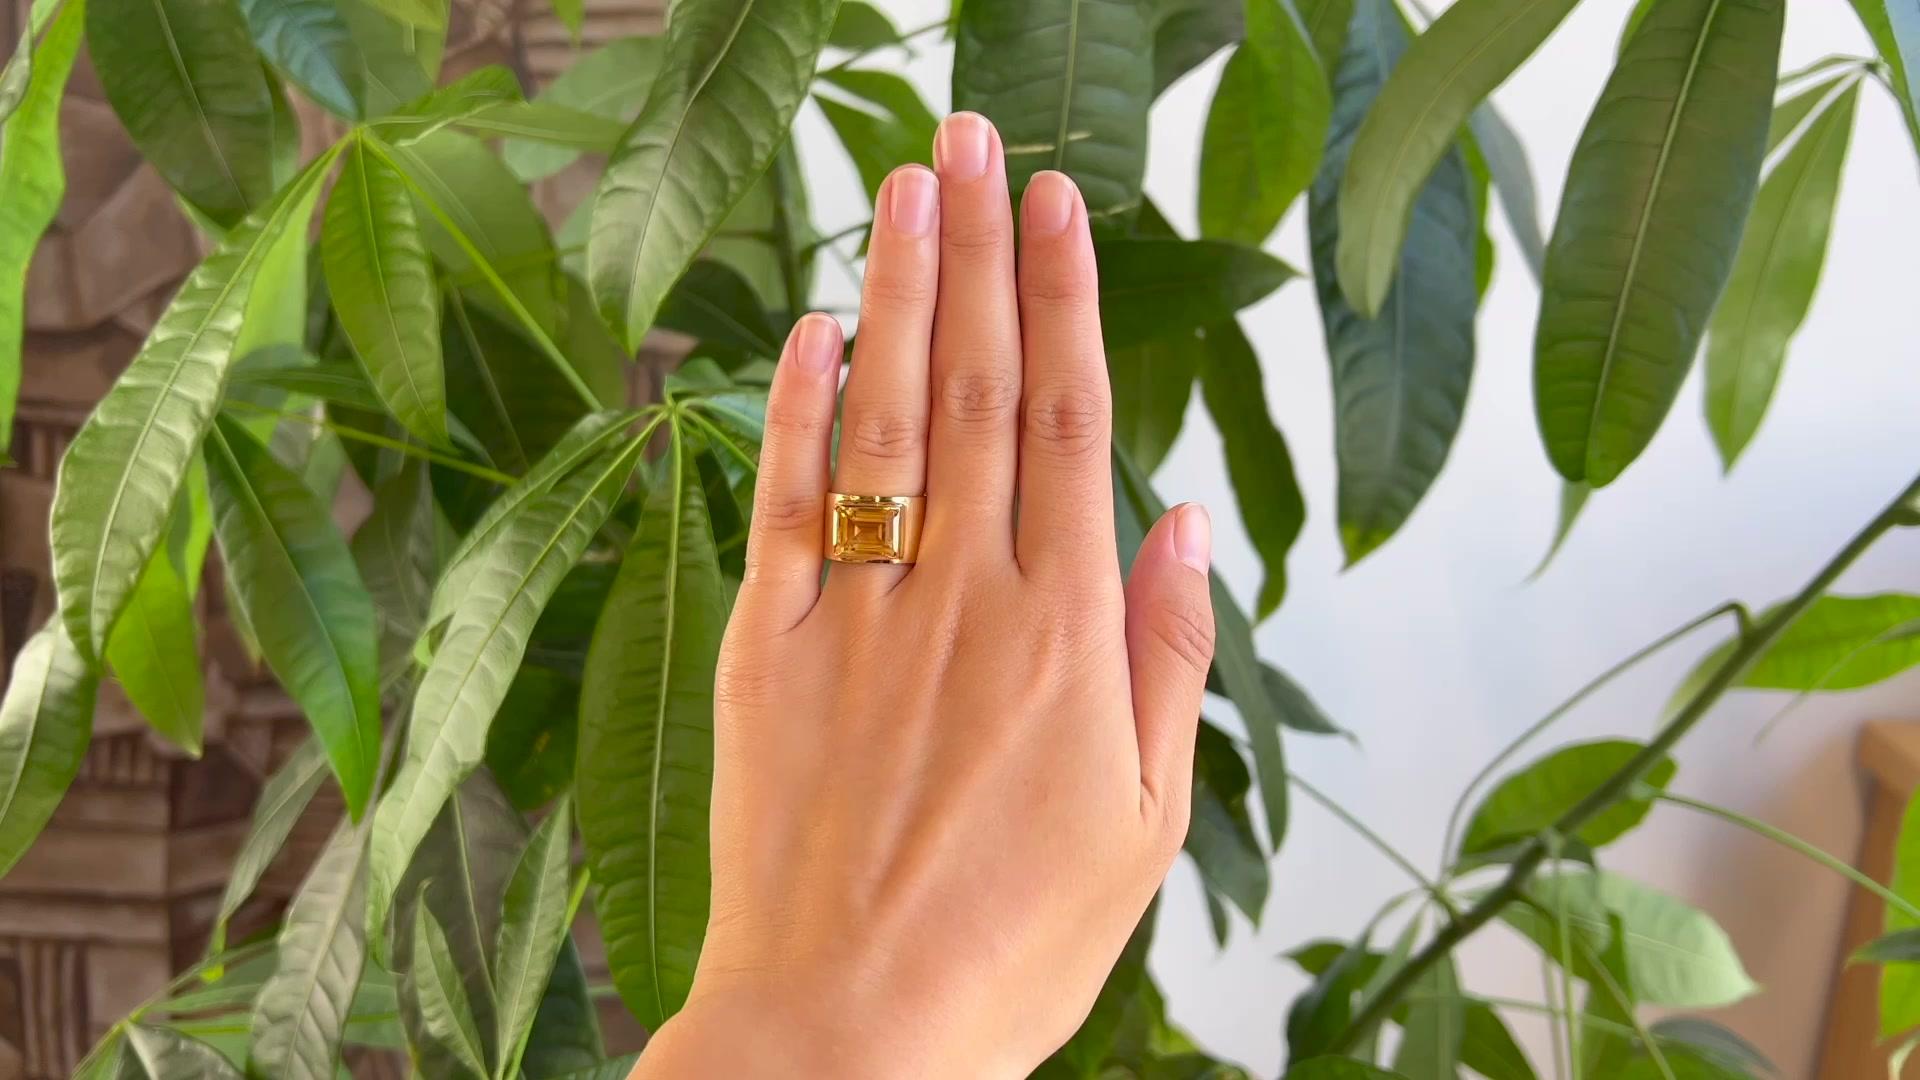 One Vintage Citrine 18 Karat Yellow Gold Cigar Band Ring. Featuring one rectangular step cut yellow citrine weighing approximately 2.65 carats. Crafted in 18 karat yellow gold with purity marks. Circa 1970. The ring is a size 5 and may be